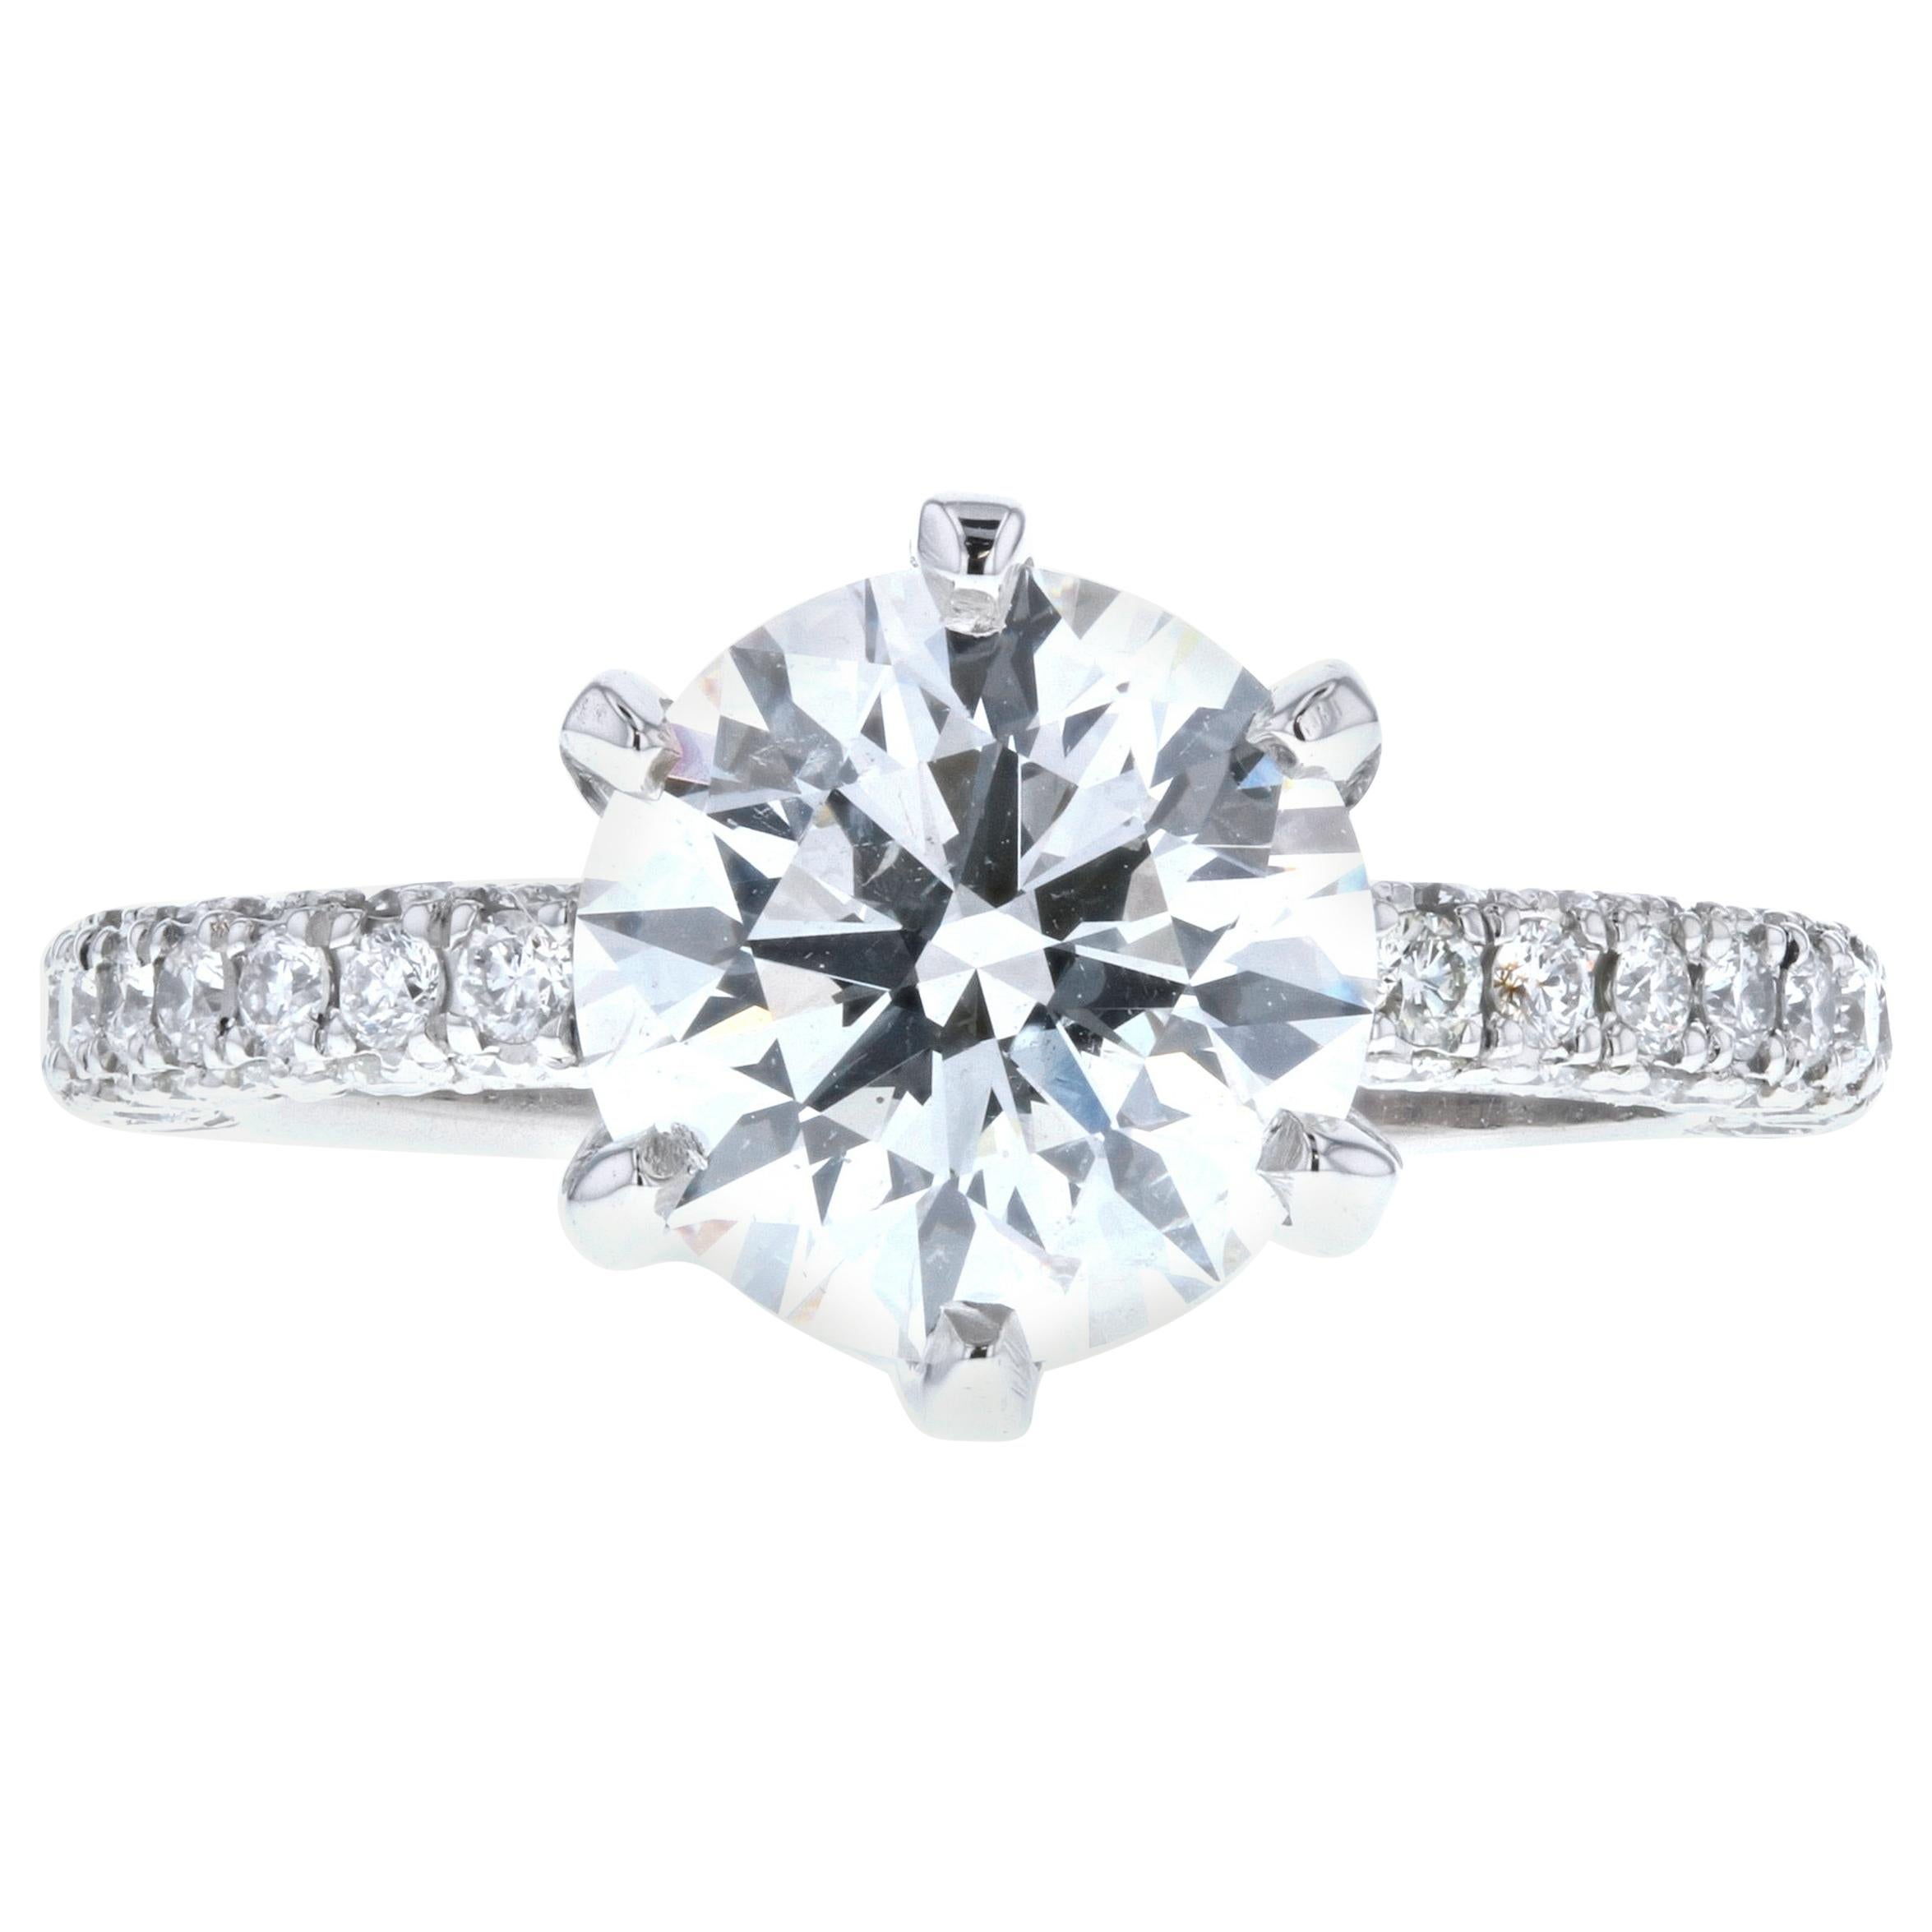 Triple Pave Diamond Engagement Ring with Six Prong Setting